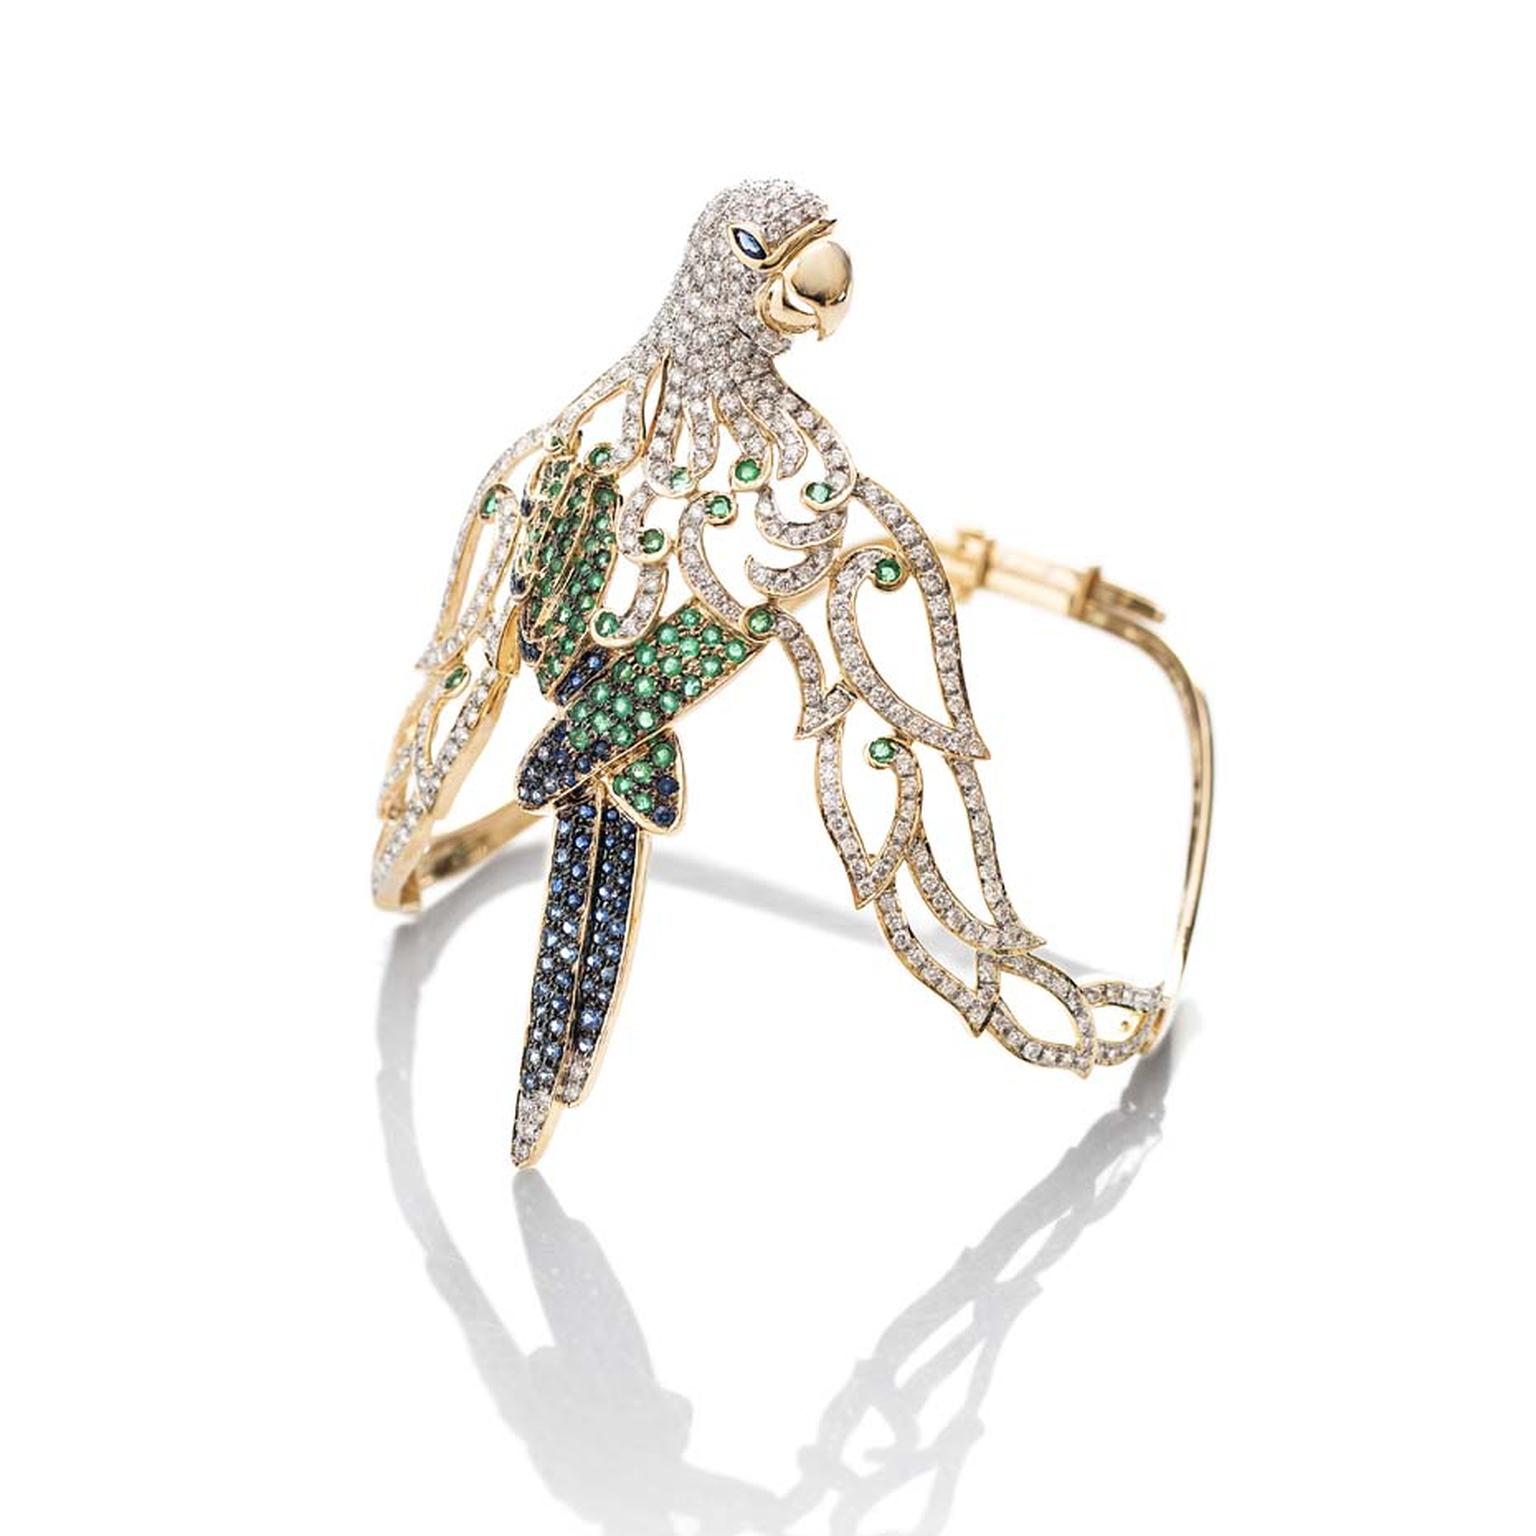 Fahra Khan_Le Jardin Exotique_An elegant parrot armlet in 18ct yellow gold with emeralds, sapphires and diamonds by Farah Khan jewellery.jpg